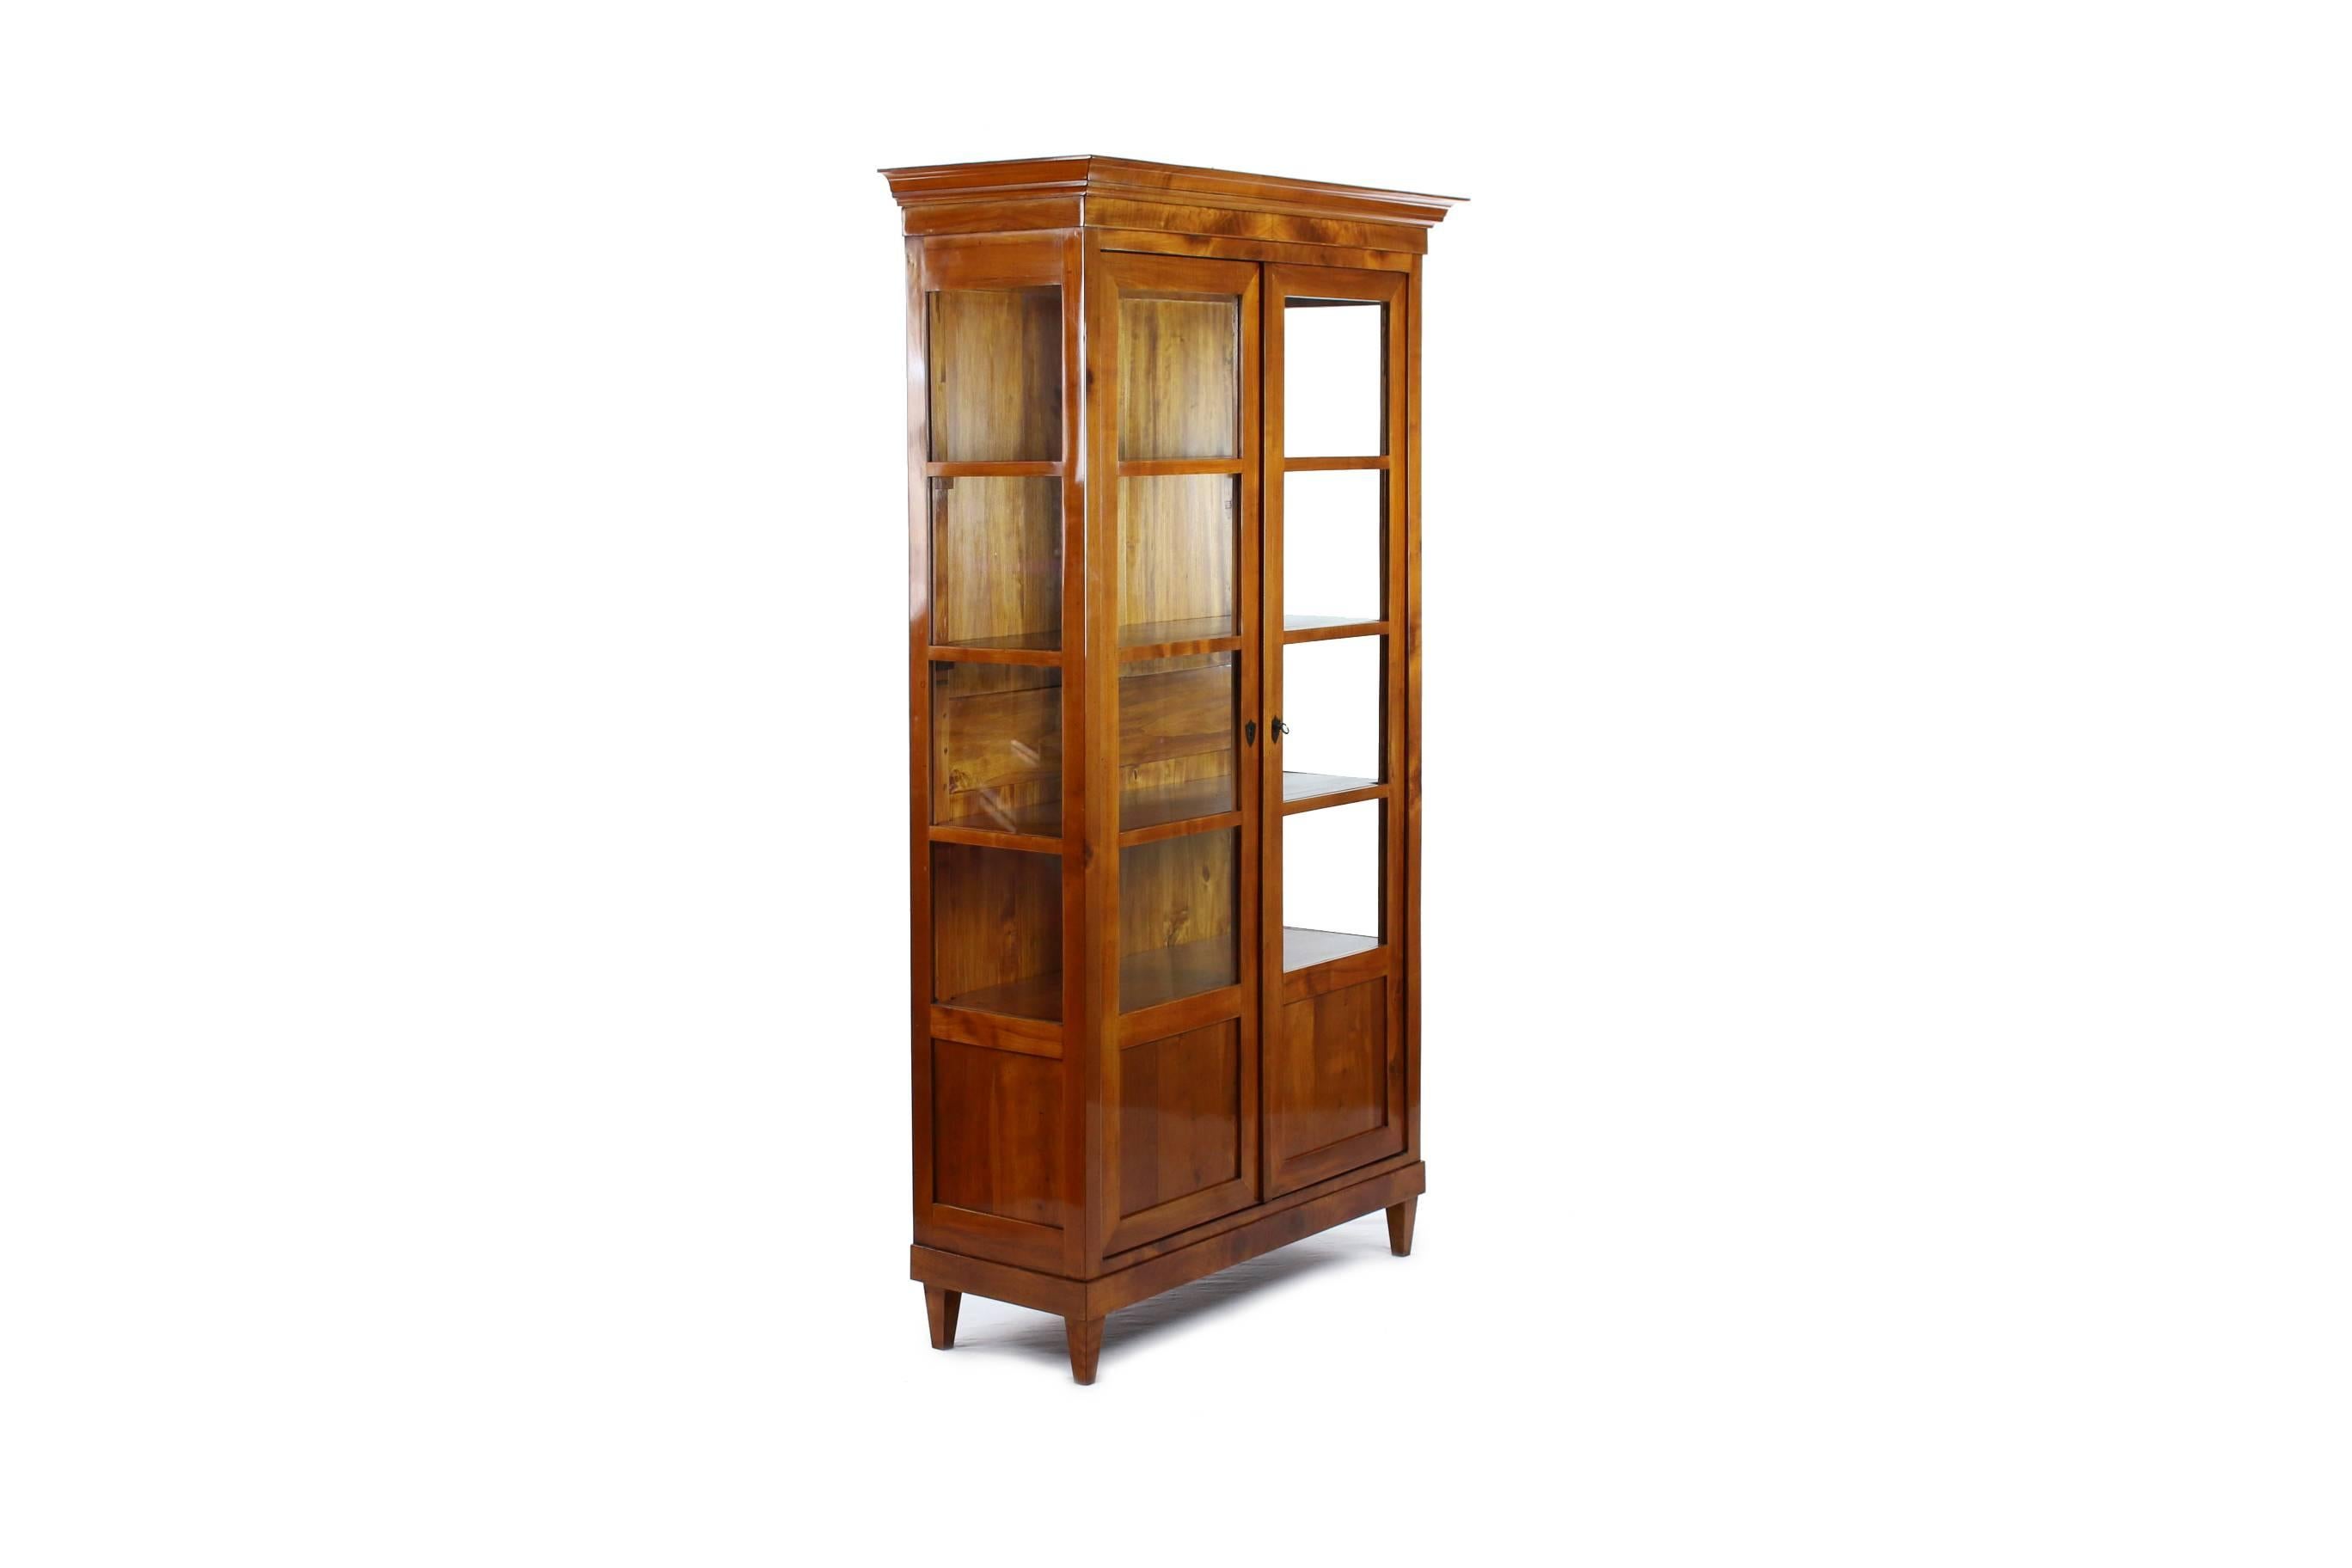 Biedermeier period corner cupboard, 
circa 1830-1840.
Cherrywood veneered.
Parts ebonized.
Top front-glazed two-door.
Two-door drag with cuddy.
Restored residential-ready state.
Shellac polish.

I dispatch by air in safe wood boxes only. So